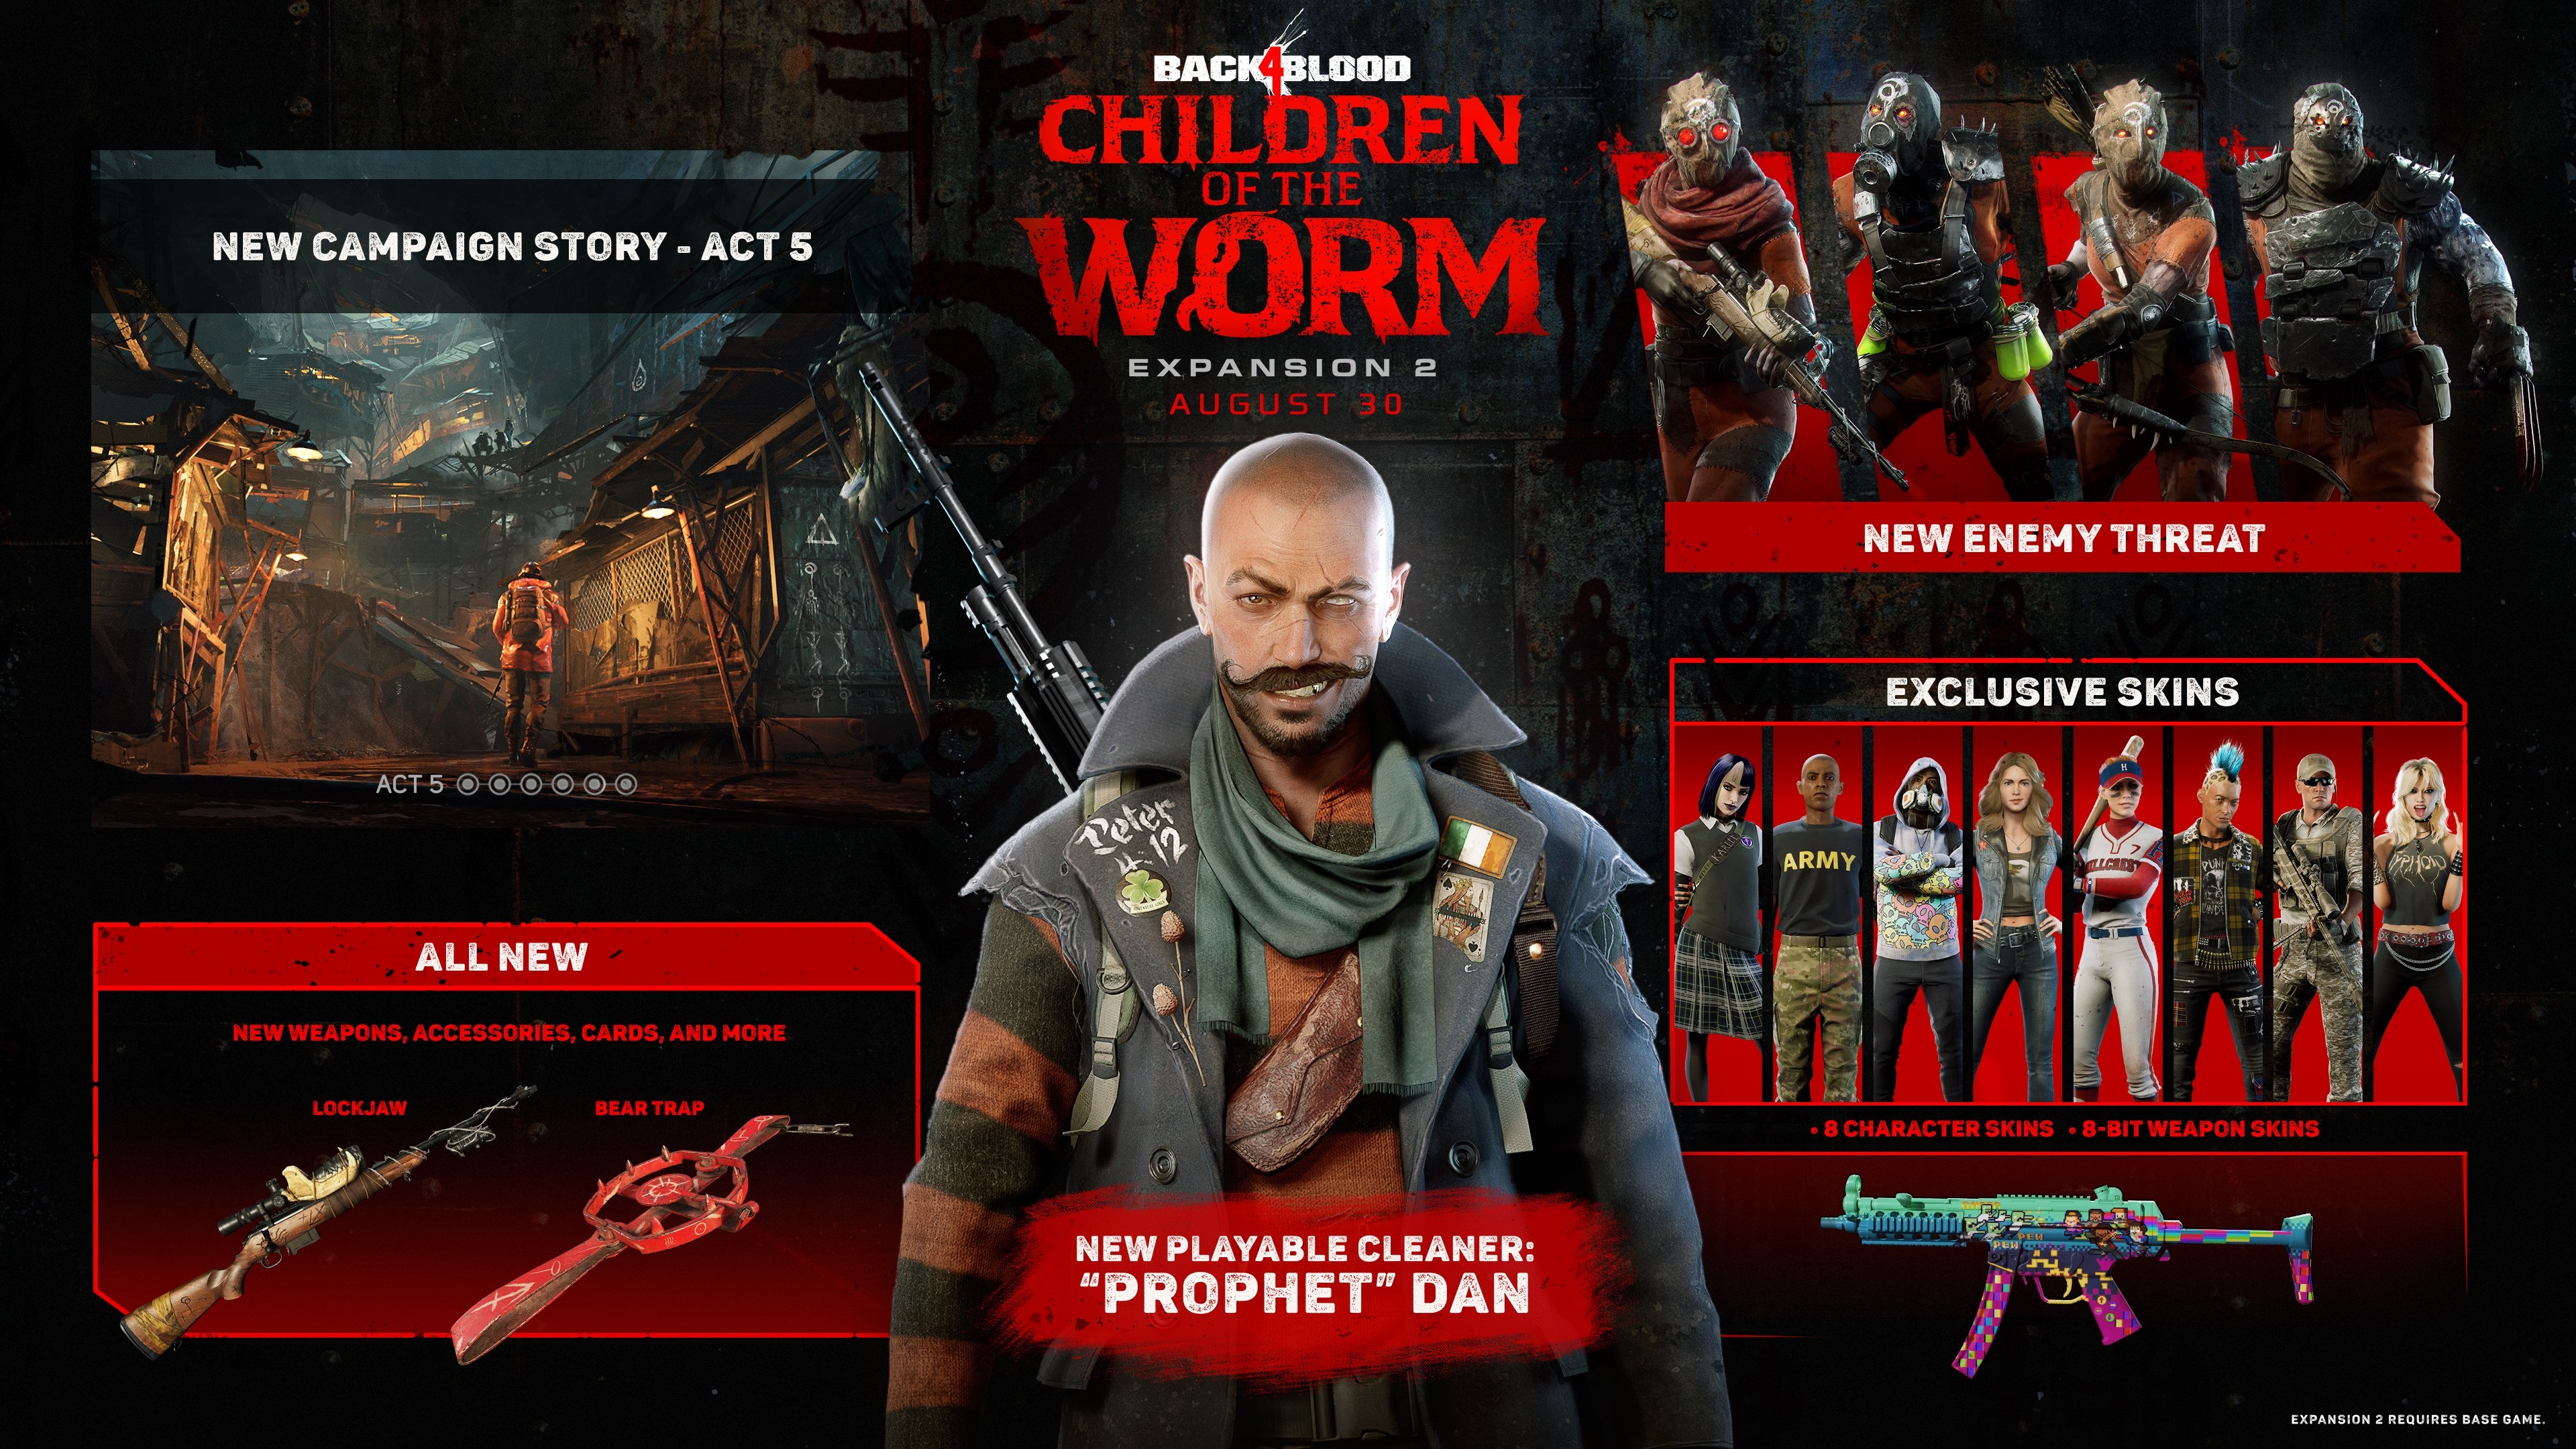 Most of the new additions in the Children of the Worm